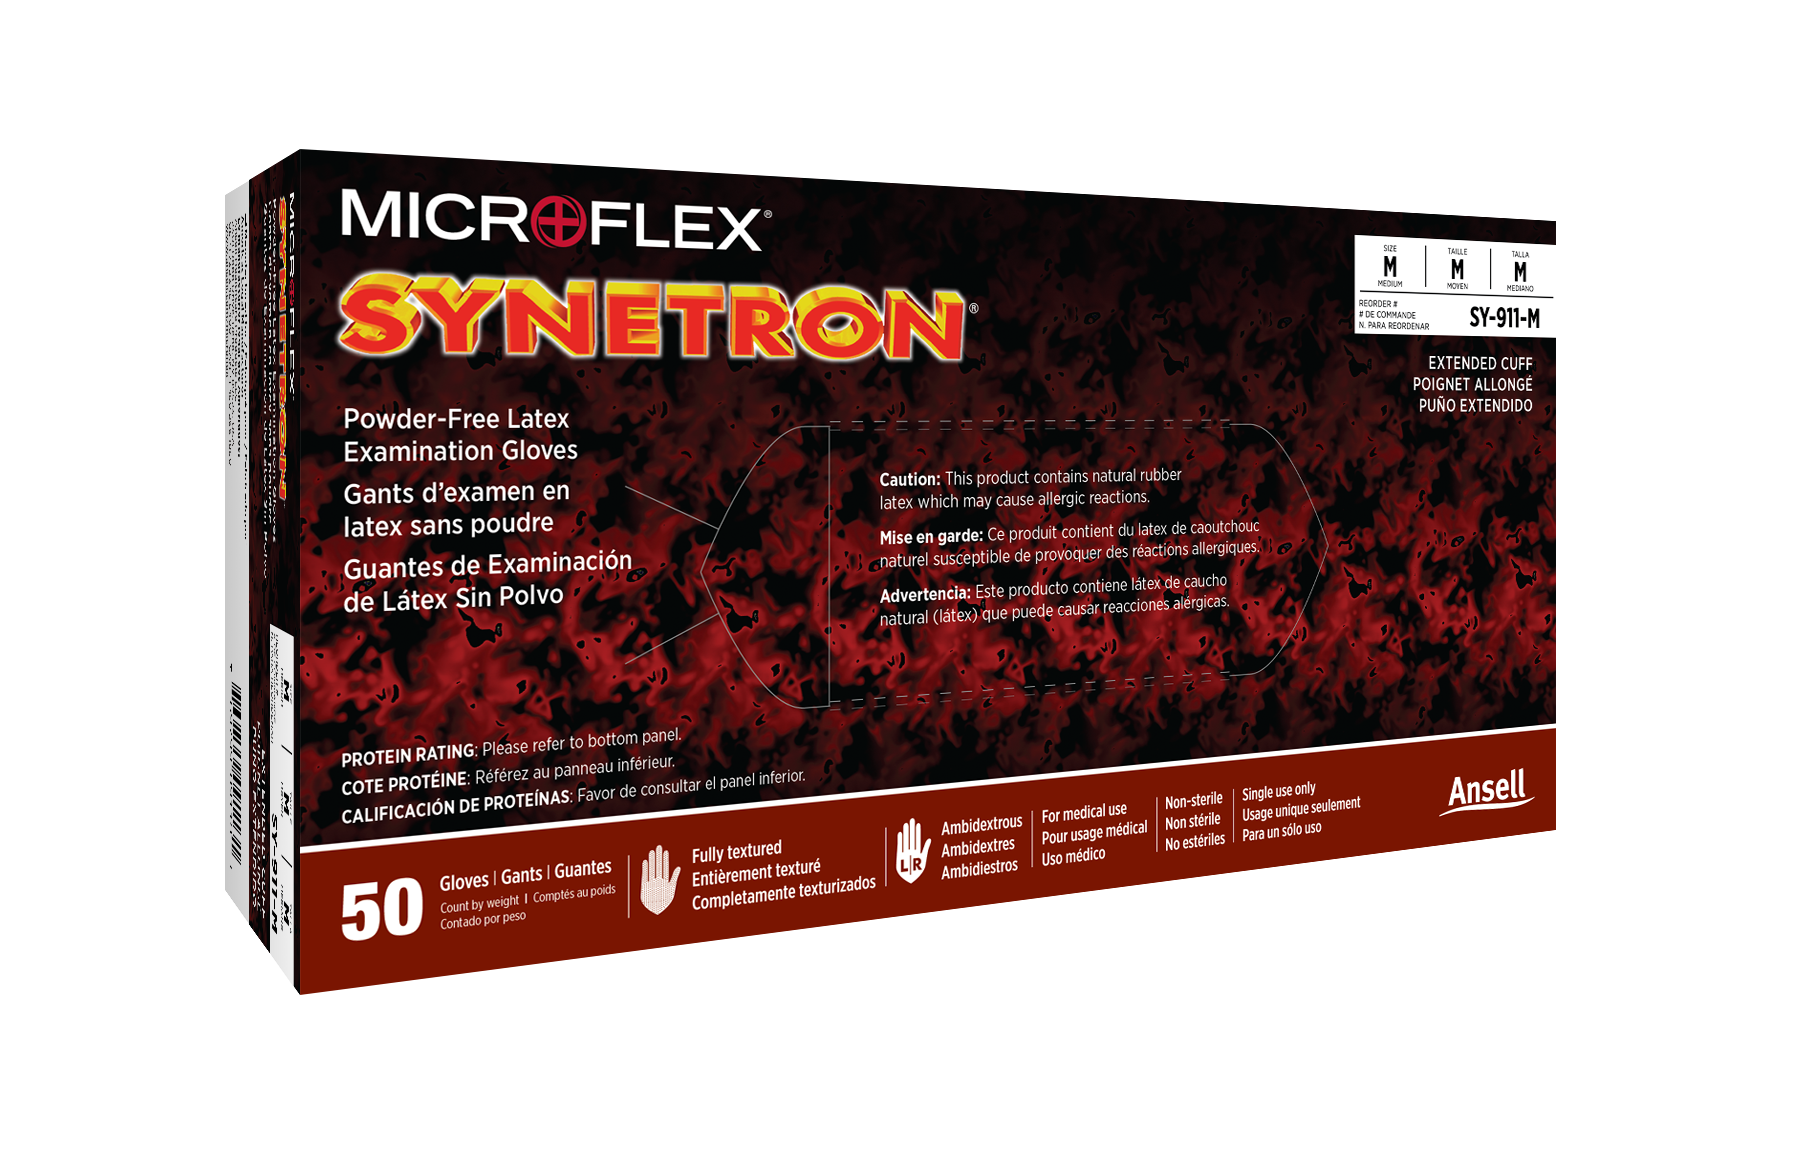 Microflex SY-911-L Synetron Latex Disposable Gloves, Large - MPR Tools & Equipment